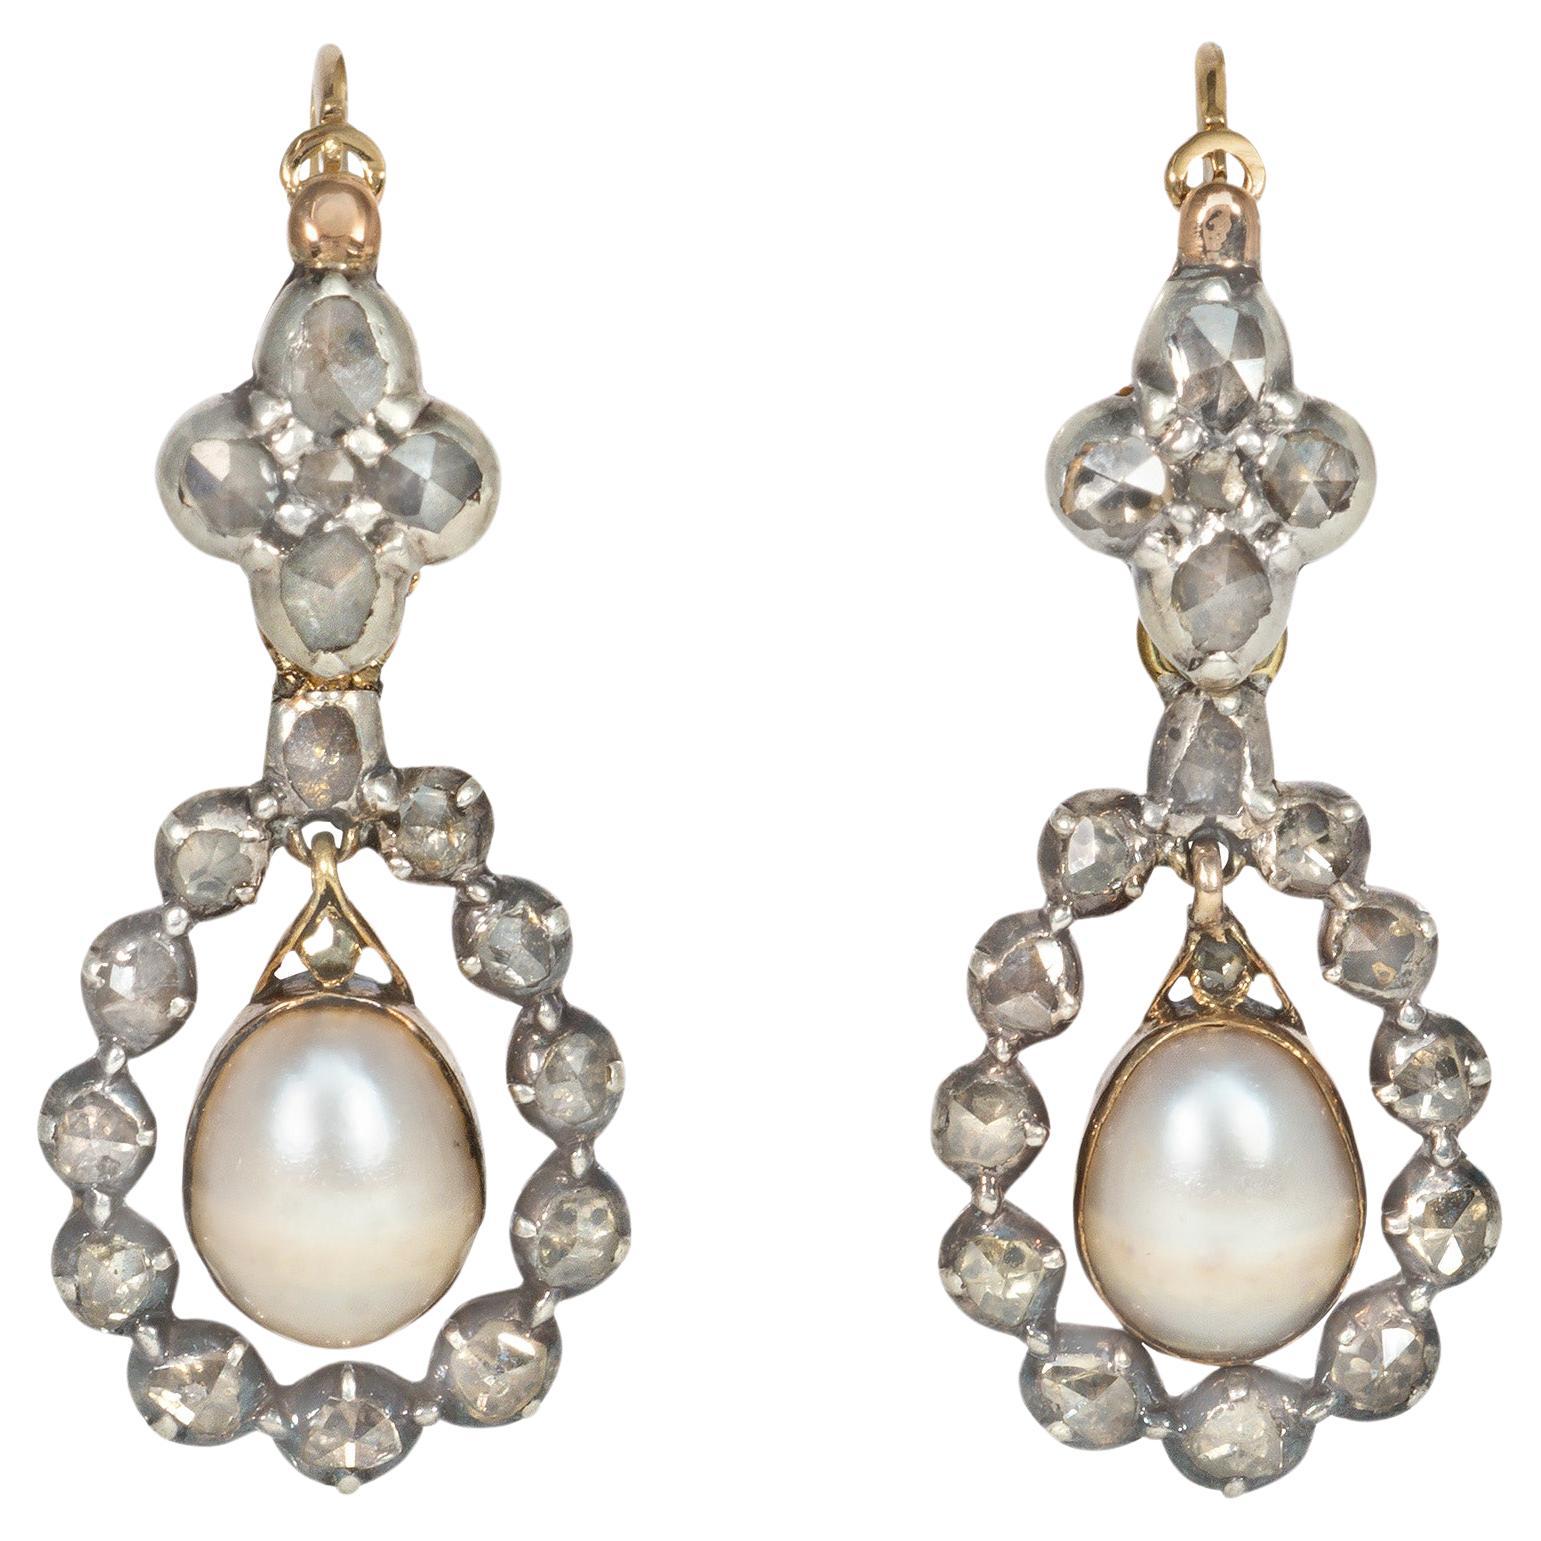 Antique Georgian Rose Diamond and Pearl Pendant Earrings in Silver-Topped Gold